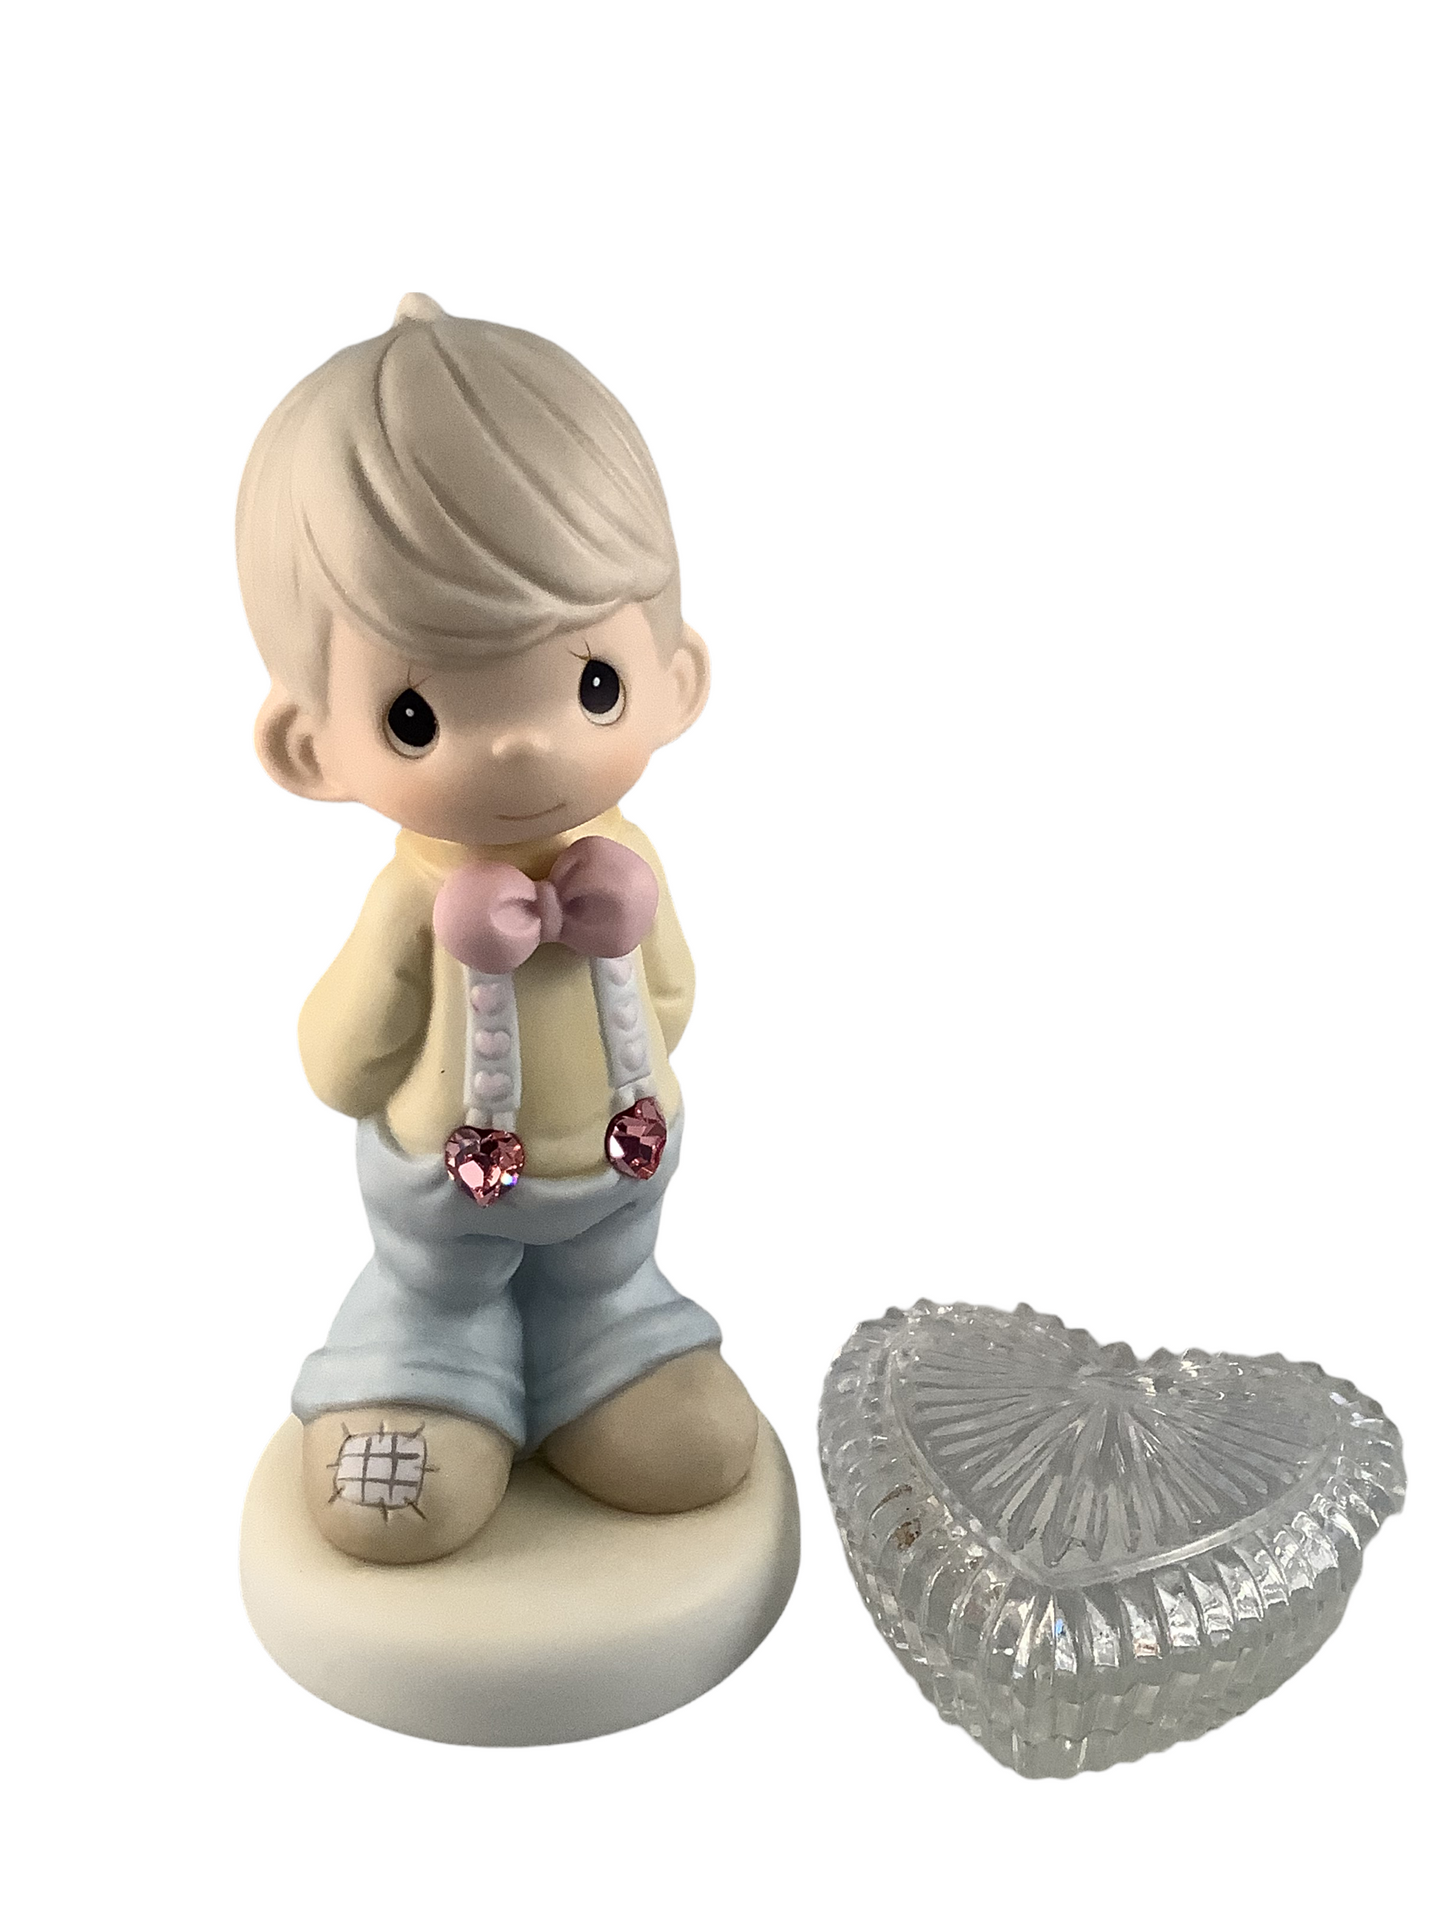 I'm Completely Suspended With Love - Precious Moment Figurine